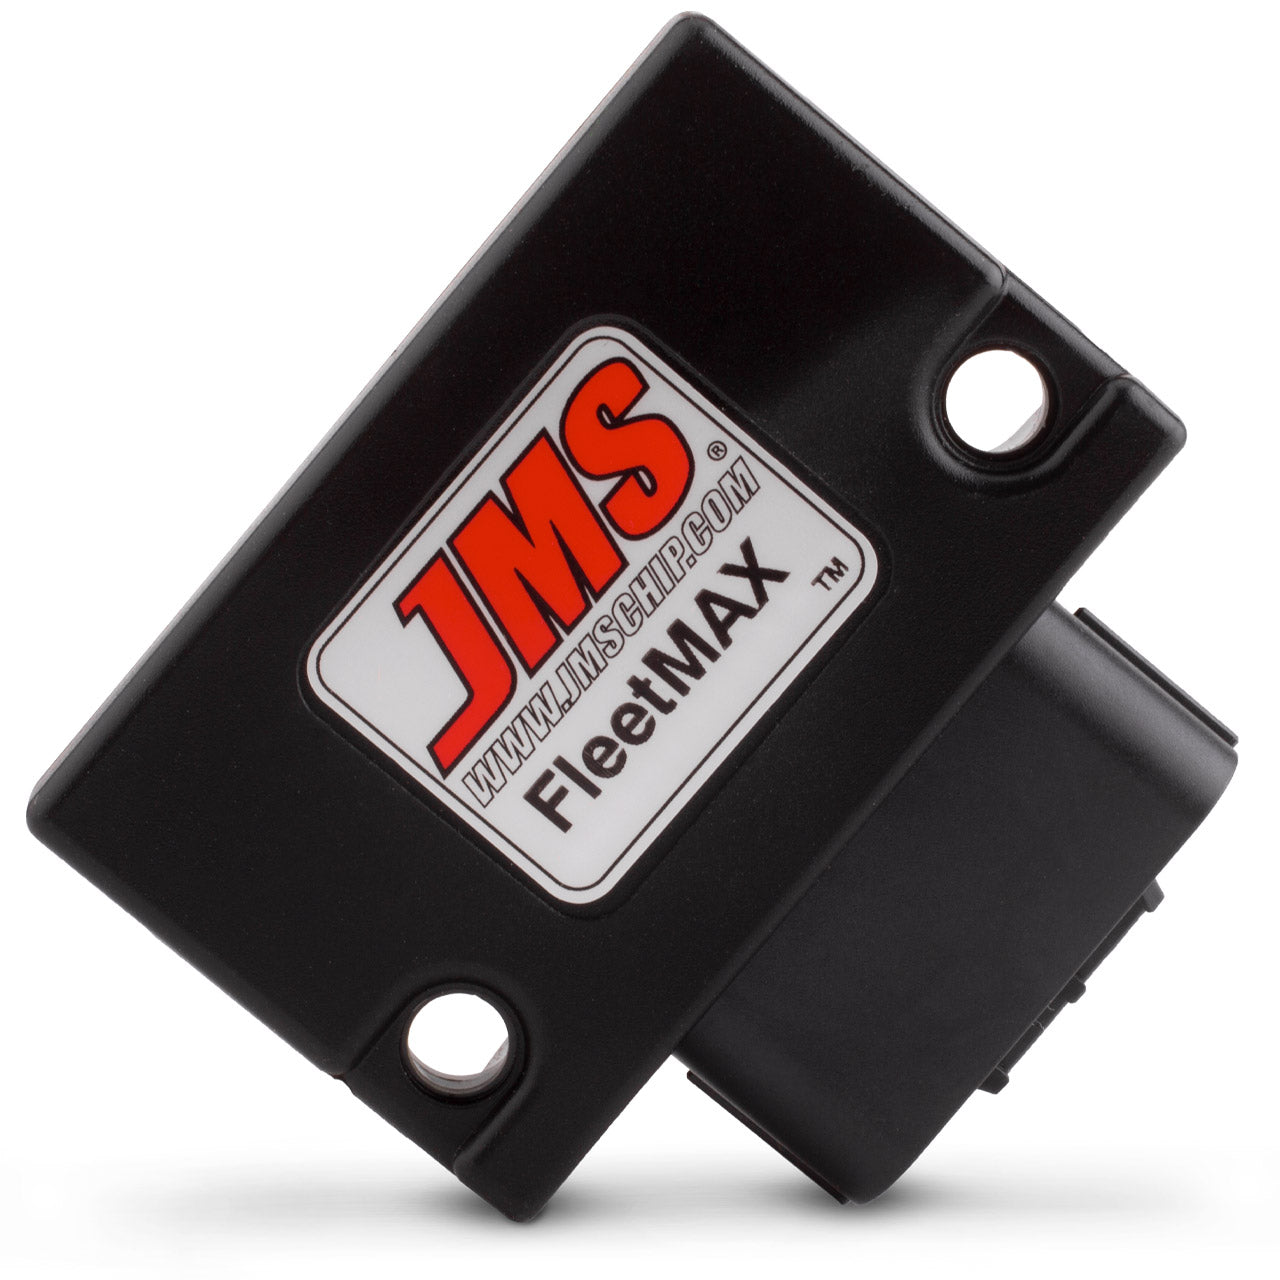 JMS FleetMAX Speed Control Device. Plug and Play for some 2005 - 2010 Ford Vehicles with electronic throttle control FX70510F